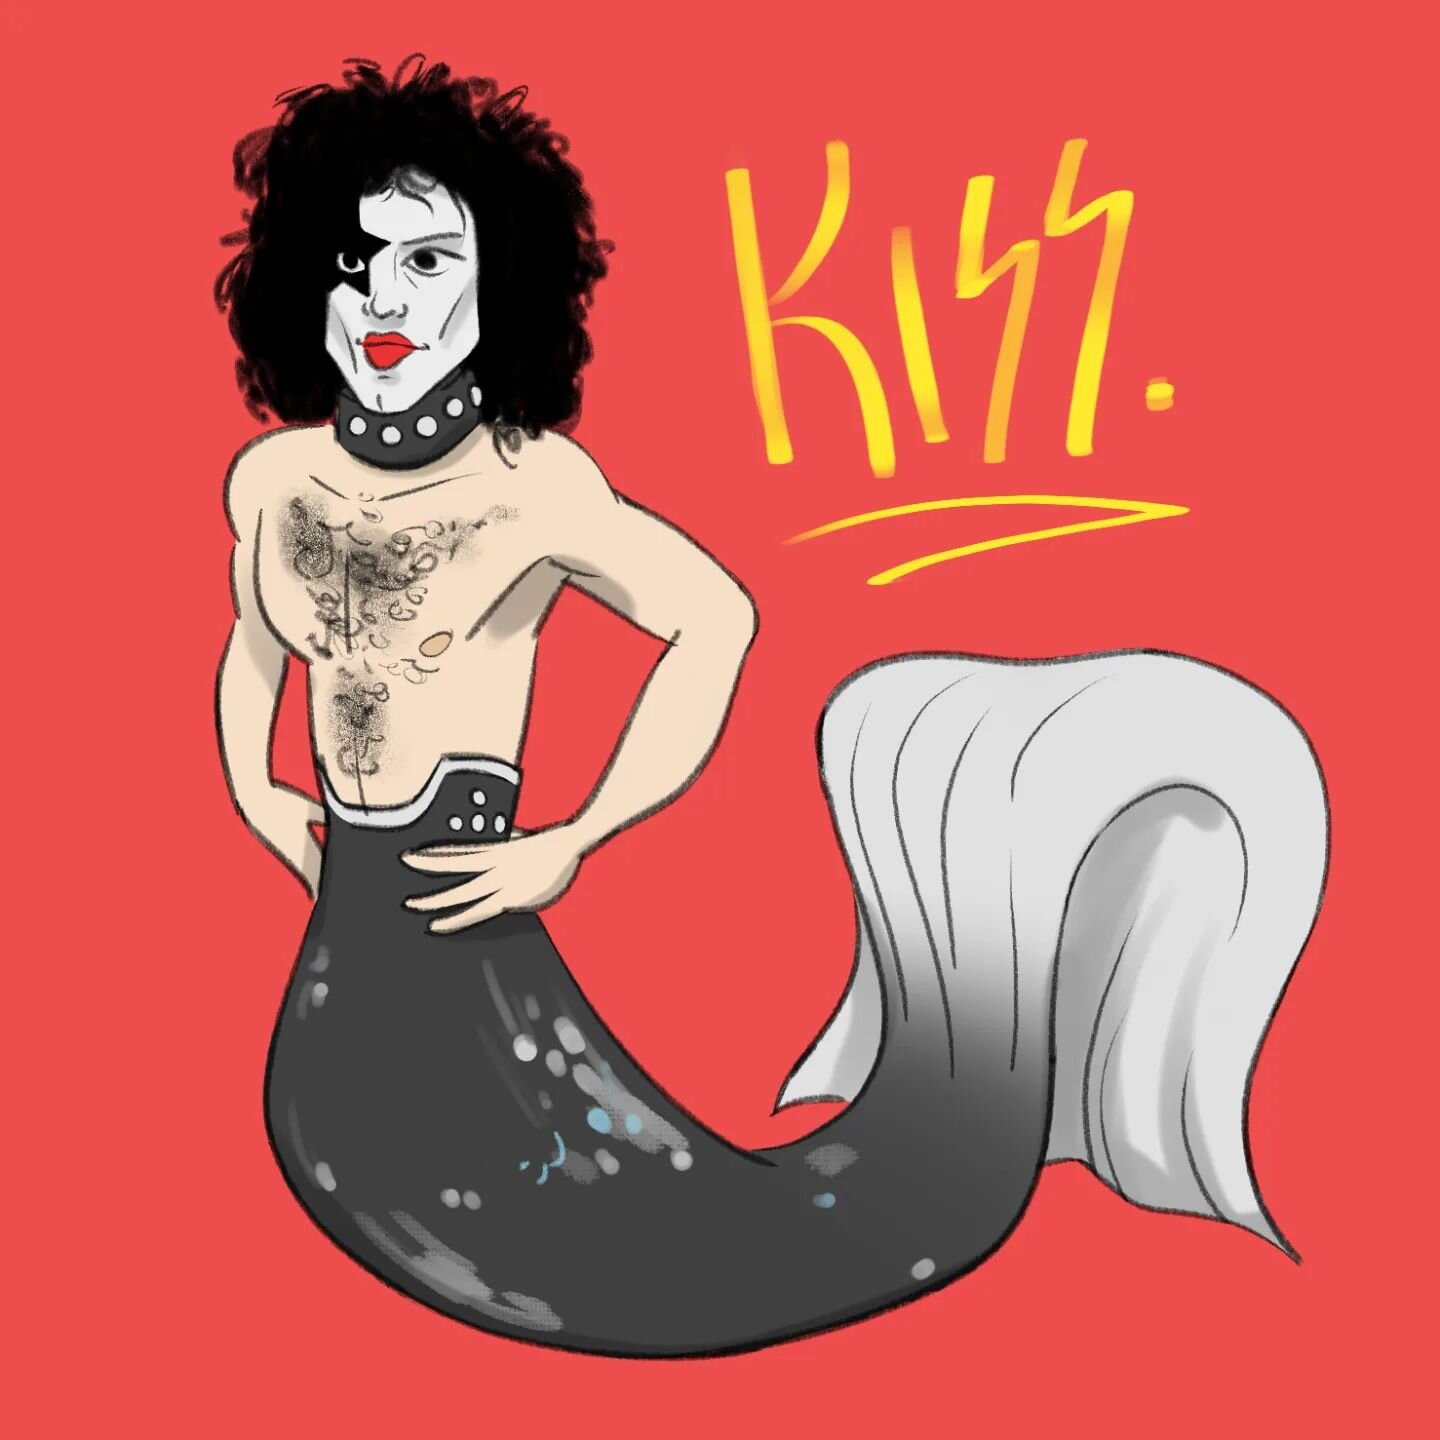 at this point I'm so behind I can't possibly take things seriously 😅💀 day 16, prompt for #mermay was 'celebrity' 💋
.
.
.
#kiss #kissband #paulstanley #kissart #kissmermaid #celebritymermaid #mermaid #mermaidart #mermaiddrawing #drawmermay2023 #mer